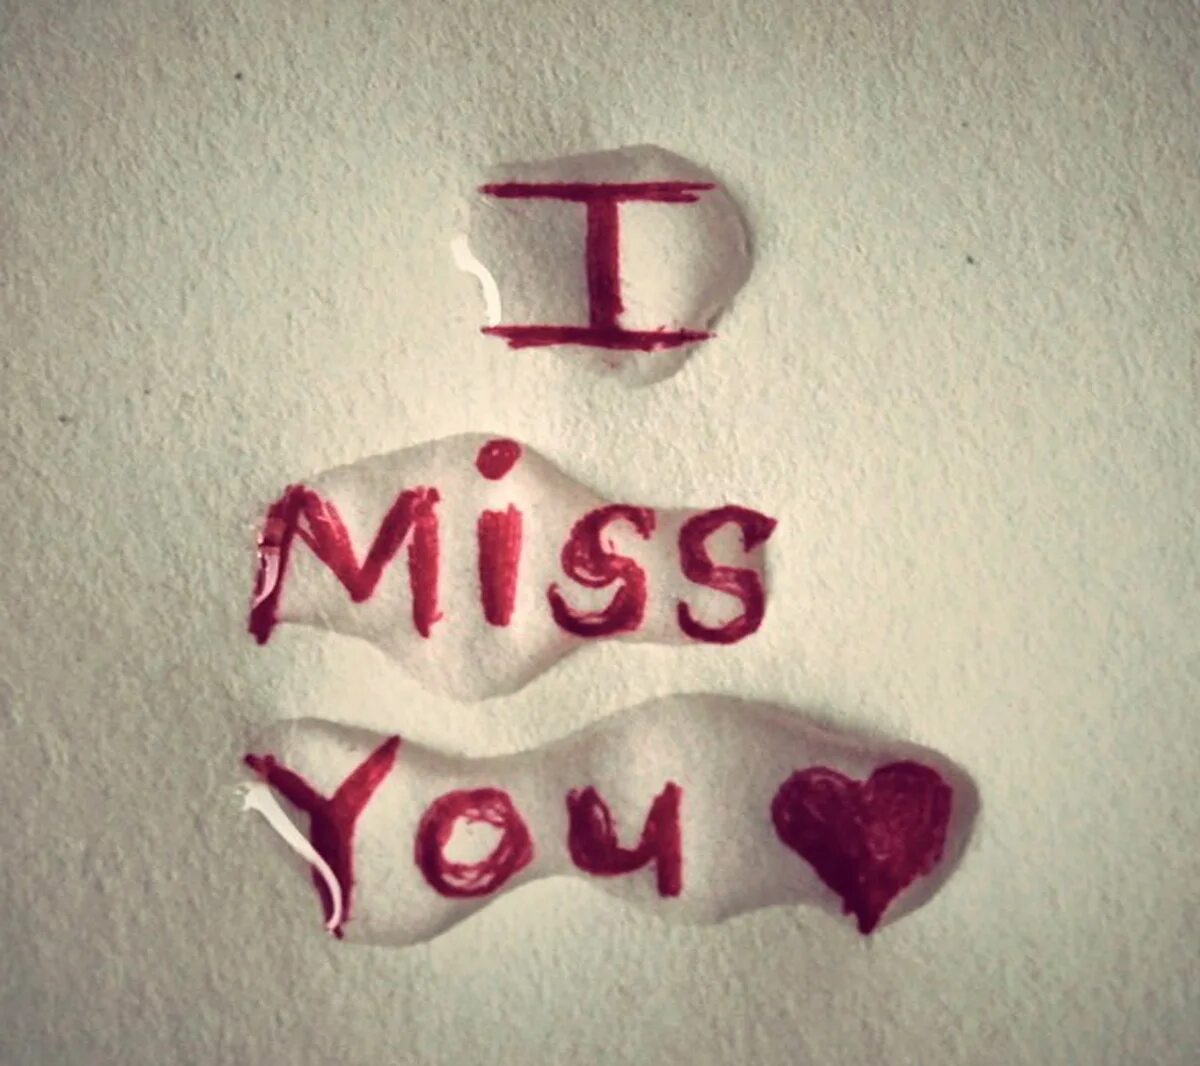 Miss you. I Miss you. I Miss you картинки. Miss you my Love. I can see i love you